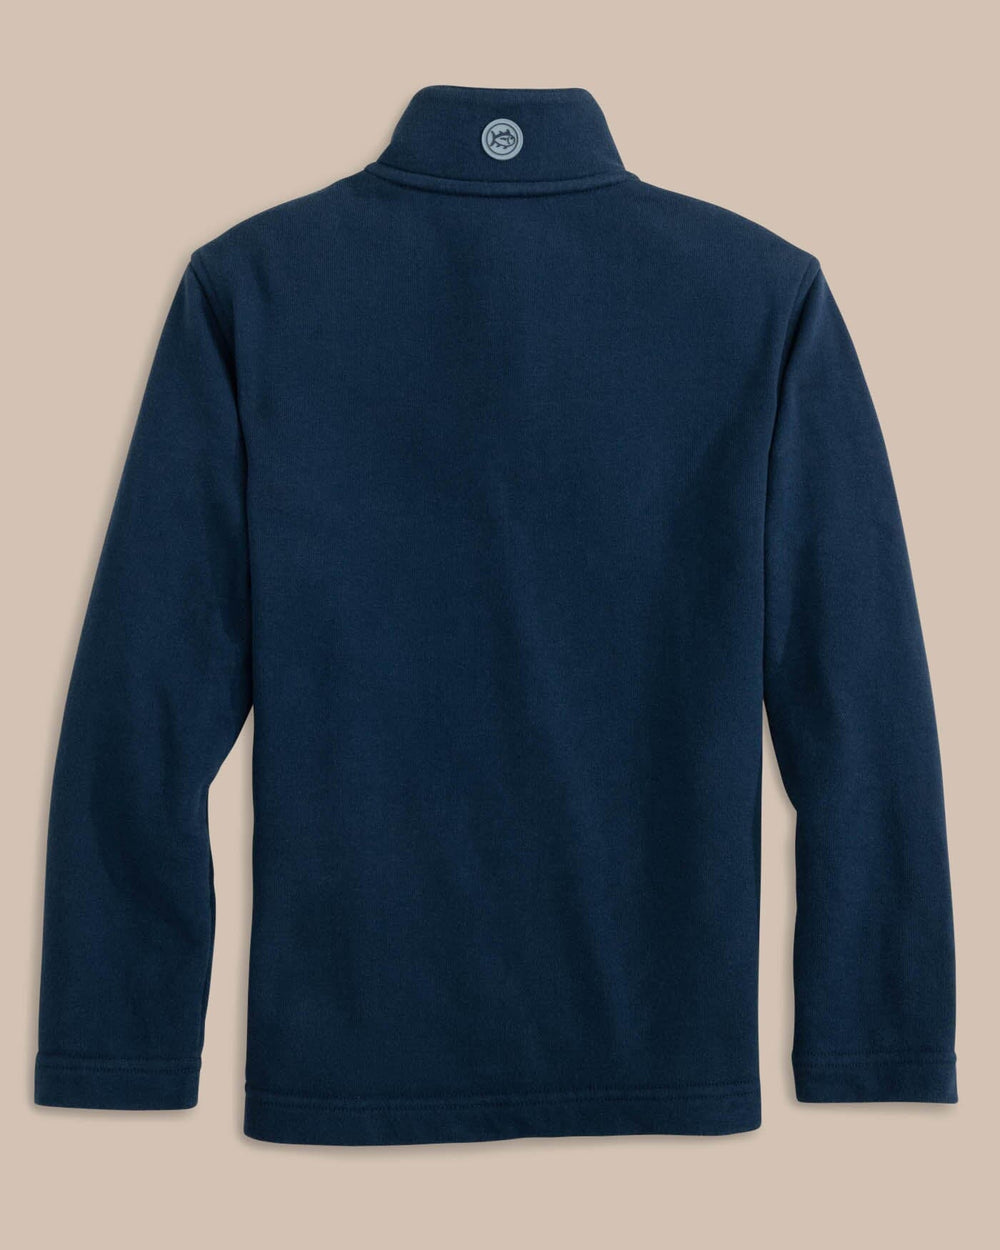 The back view of the Southern Tide Youth McLain Quarter Zip by Southern Tide - Dress Blue